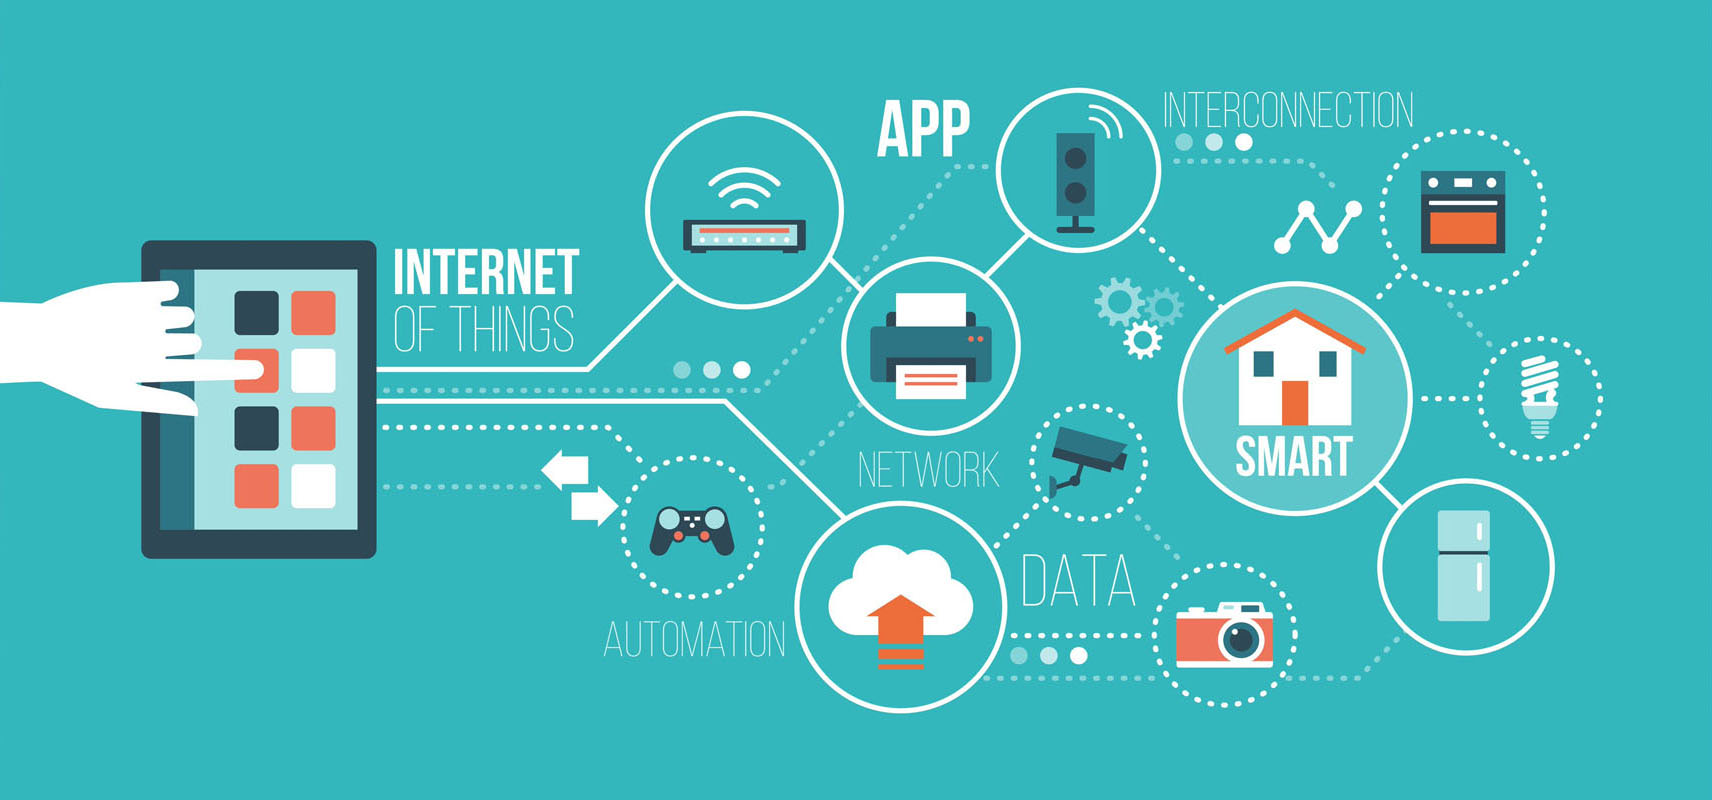 IoT, the Internet of Things. A Short take